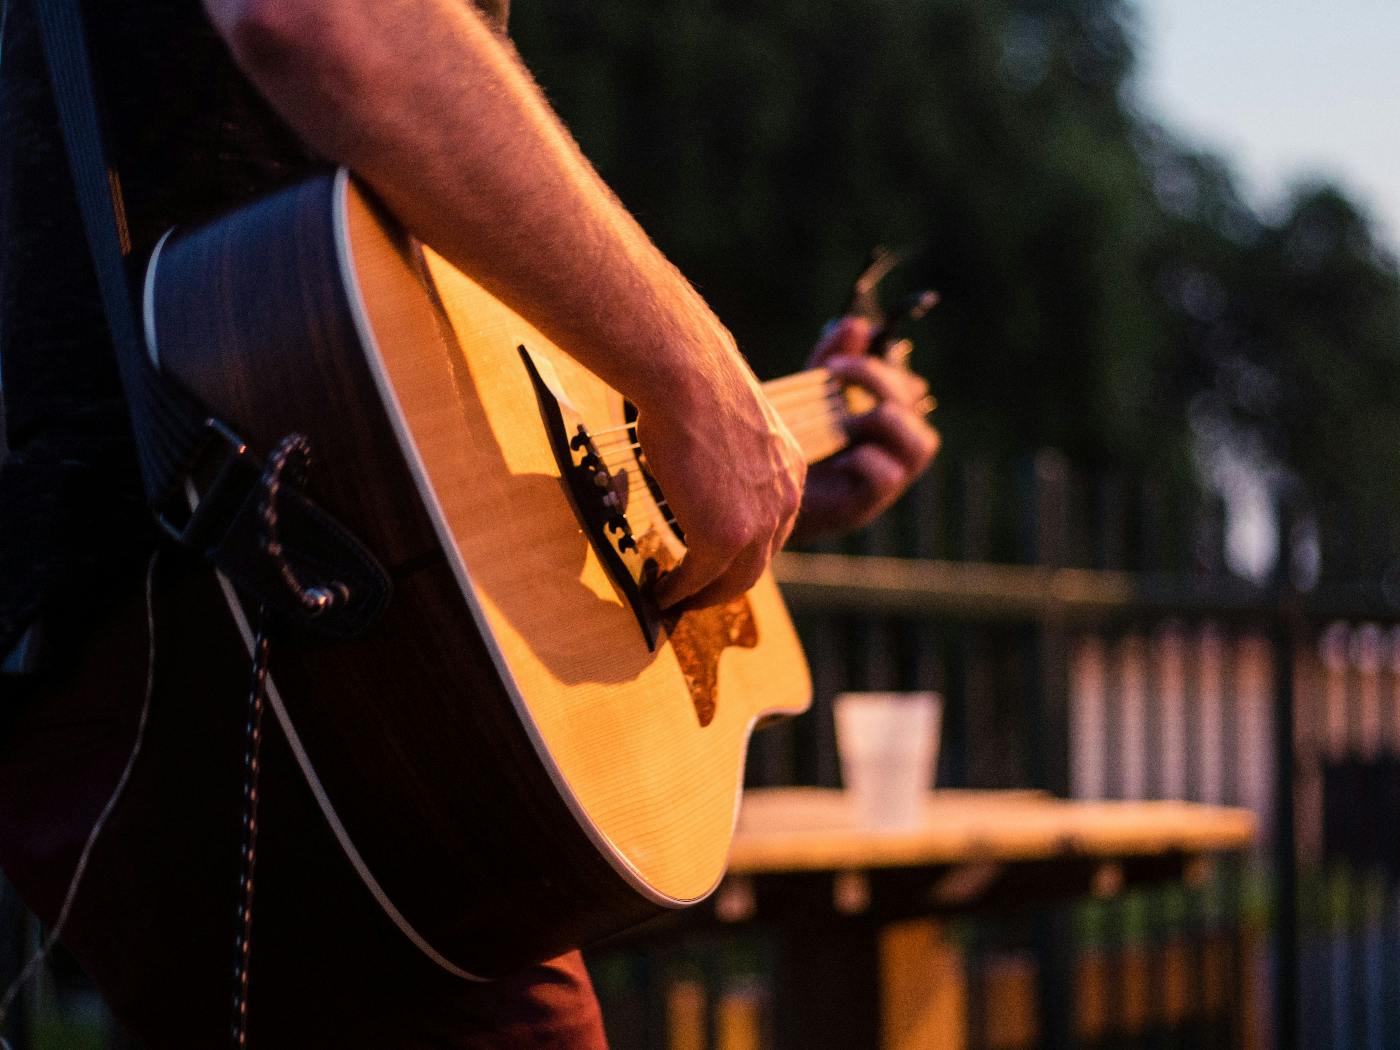 A man playing guitar on an outdoor patio